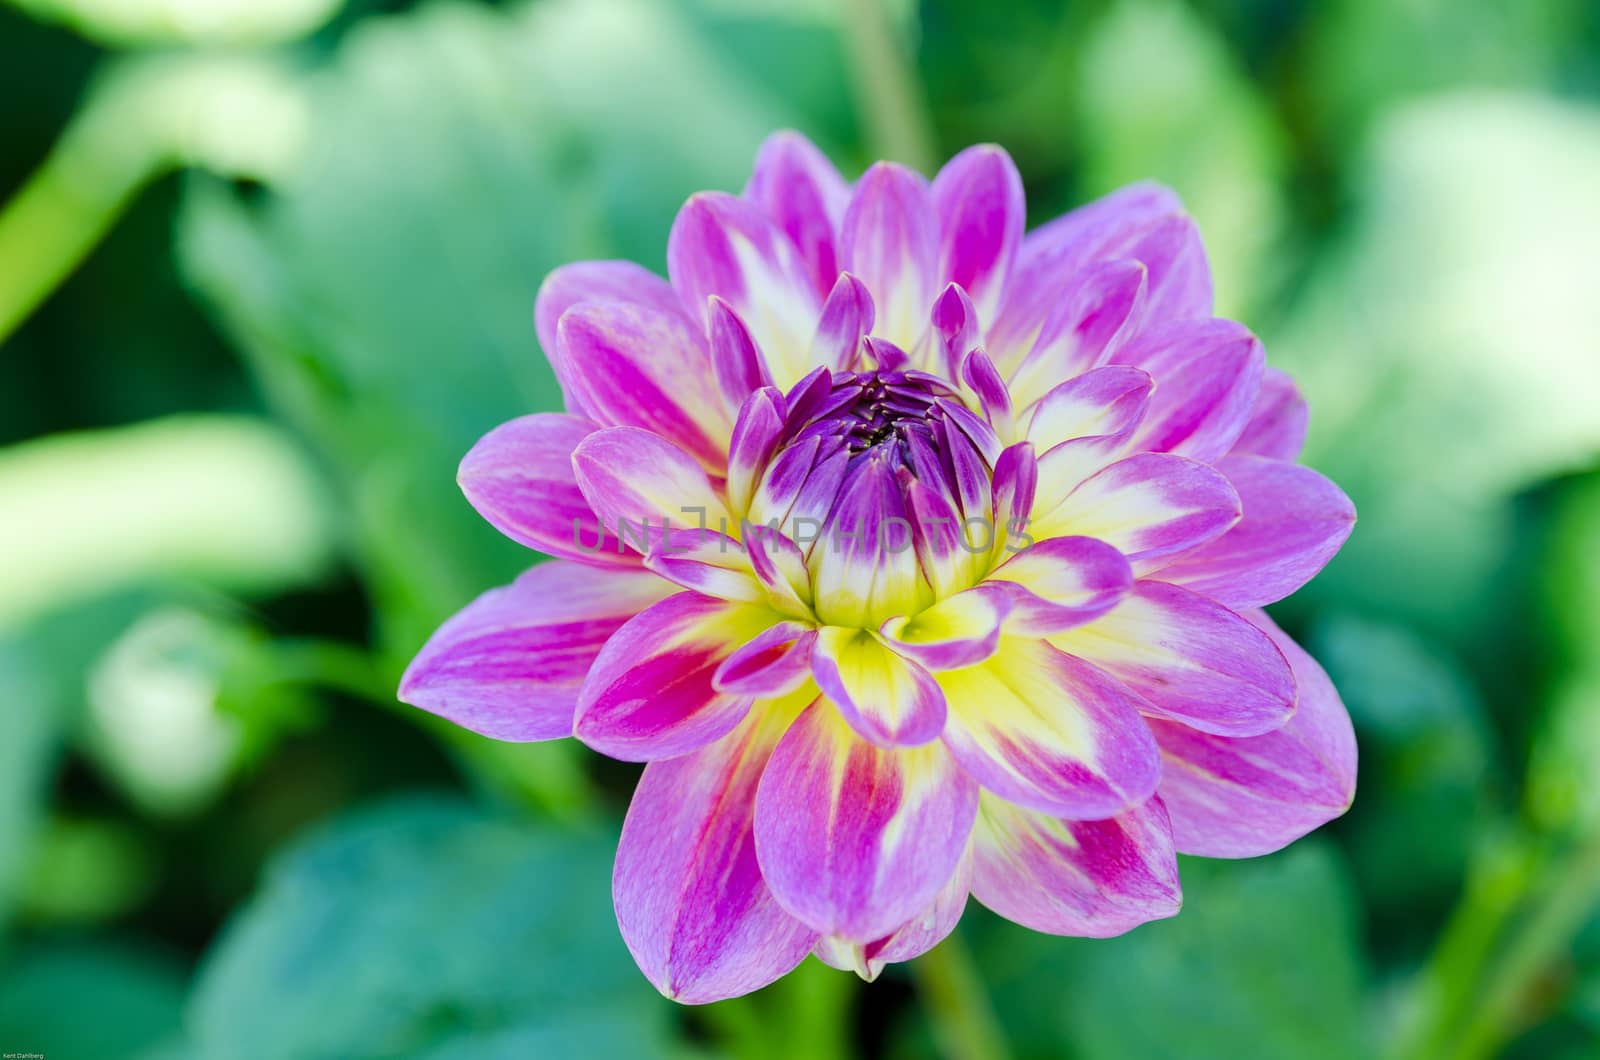 One lovely flower from the family dahlia the name is Rundale